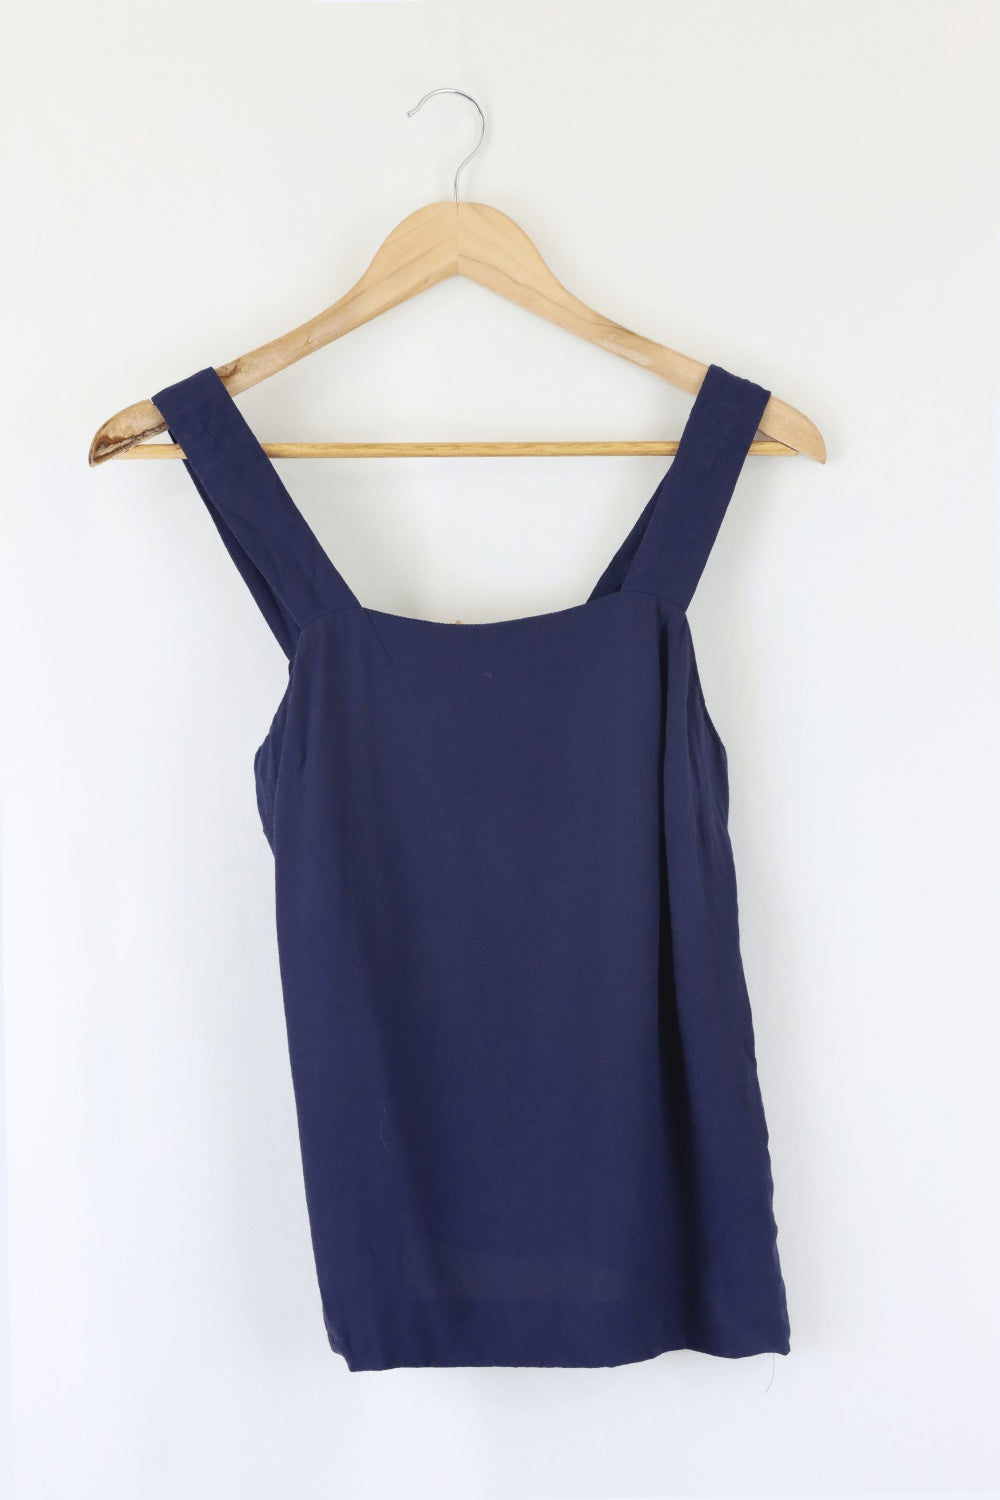 & Other Stories Navy Singlet 4